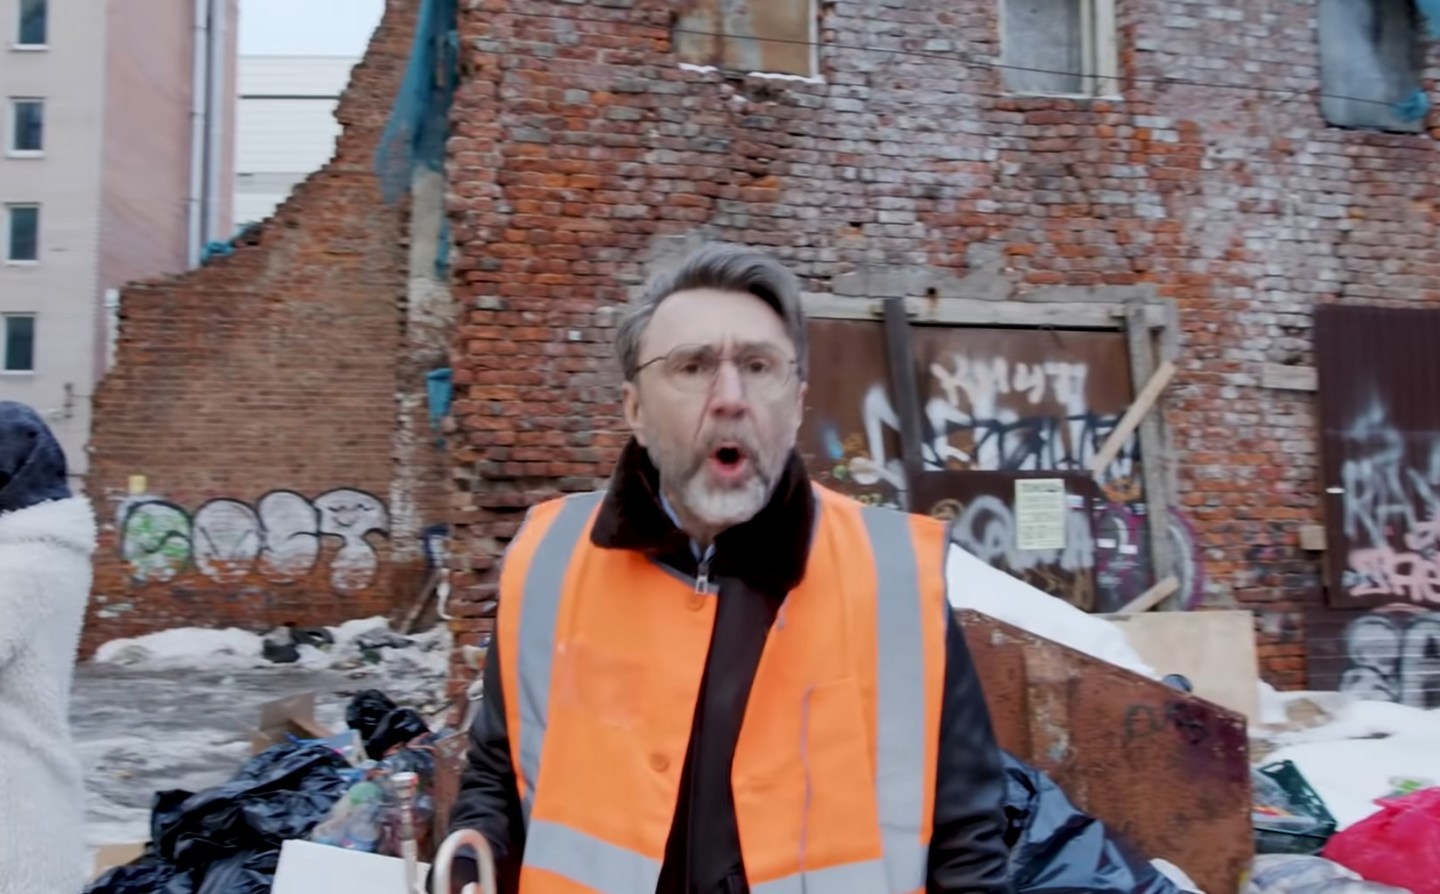 Inspired by the garbage collapse in St. Petersburg, Sergey Shnurov released a video about the poor performance of local utilities